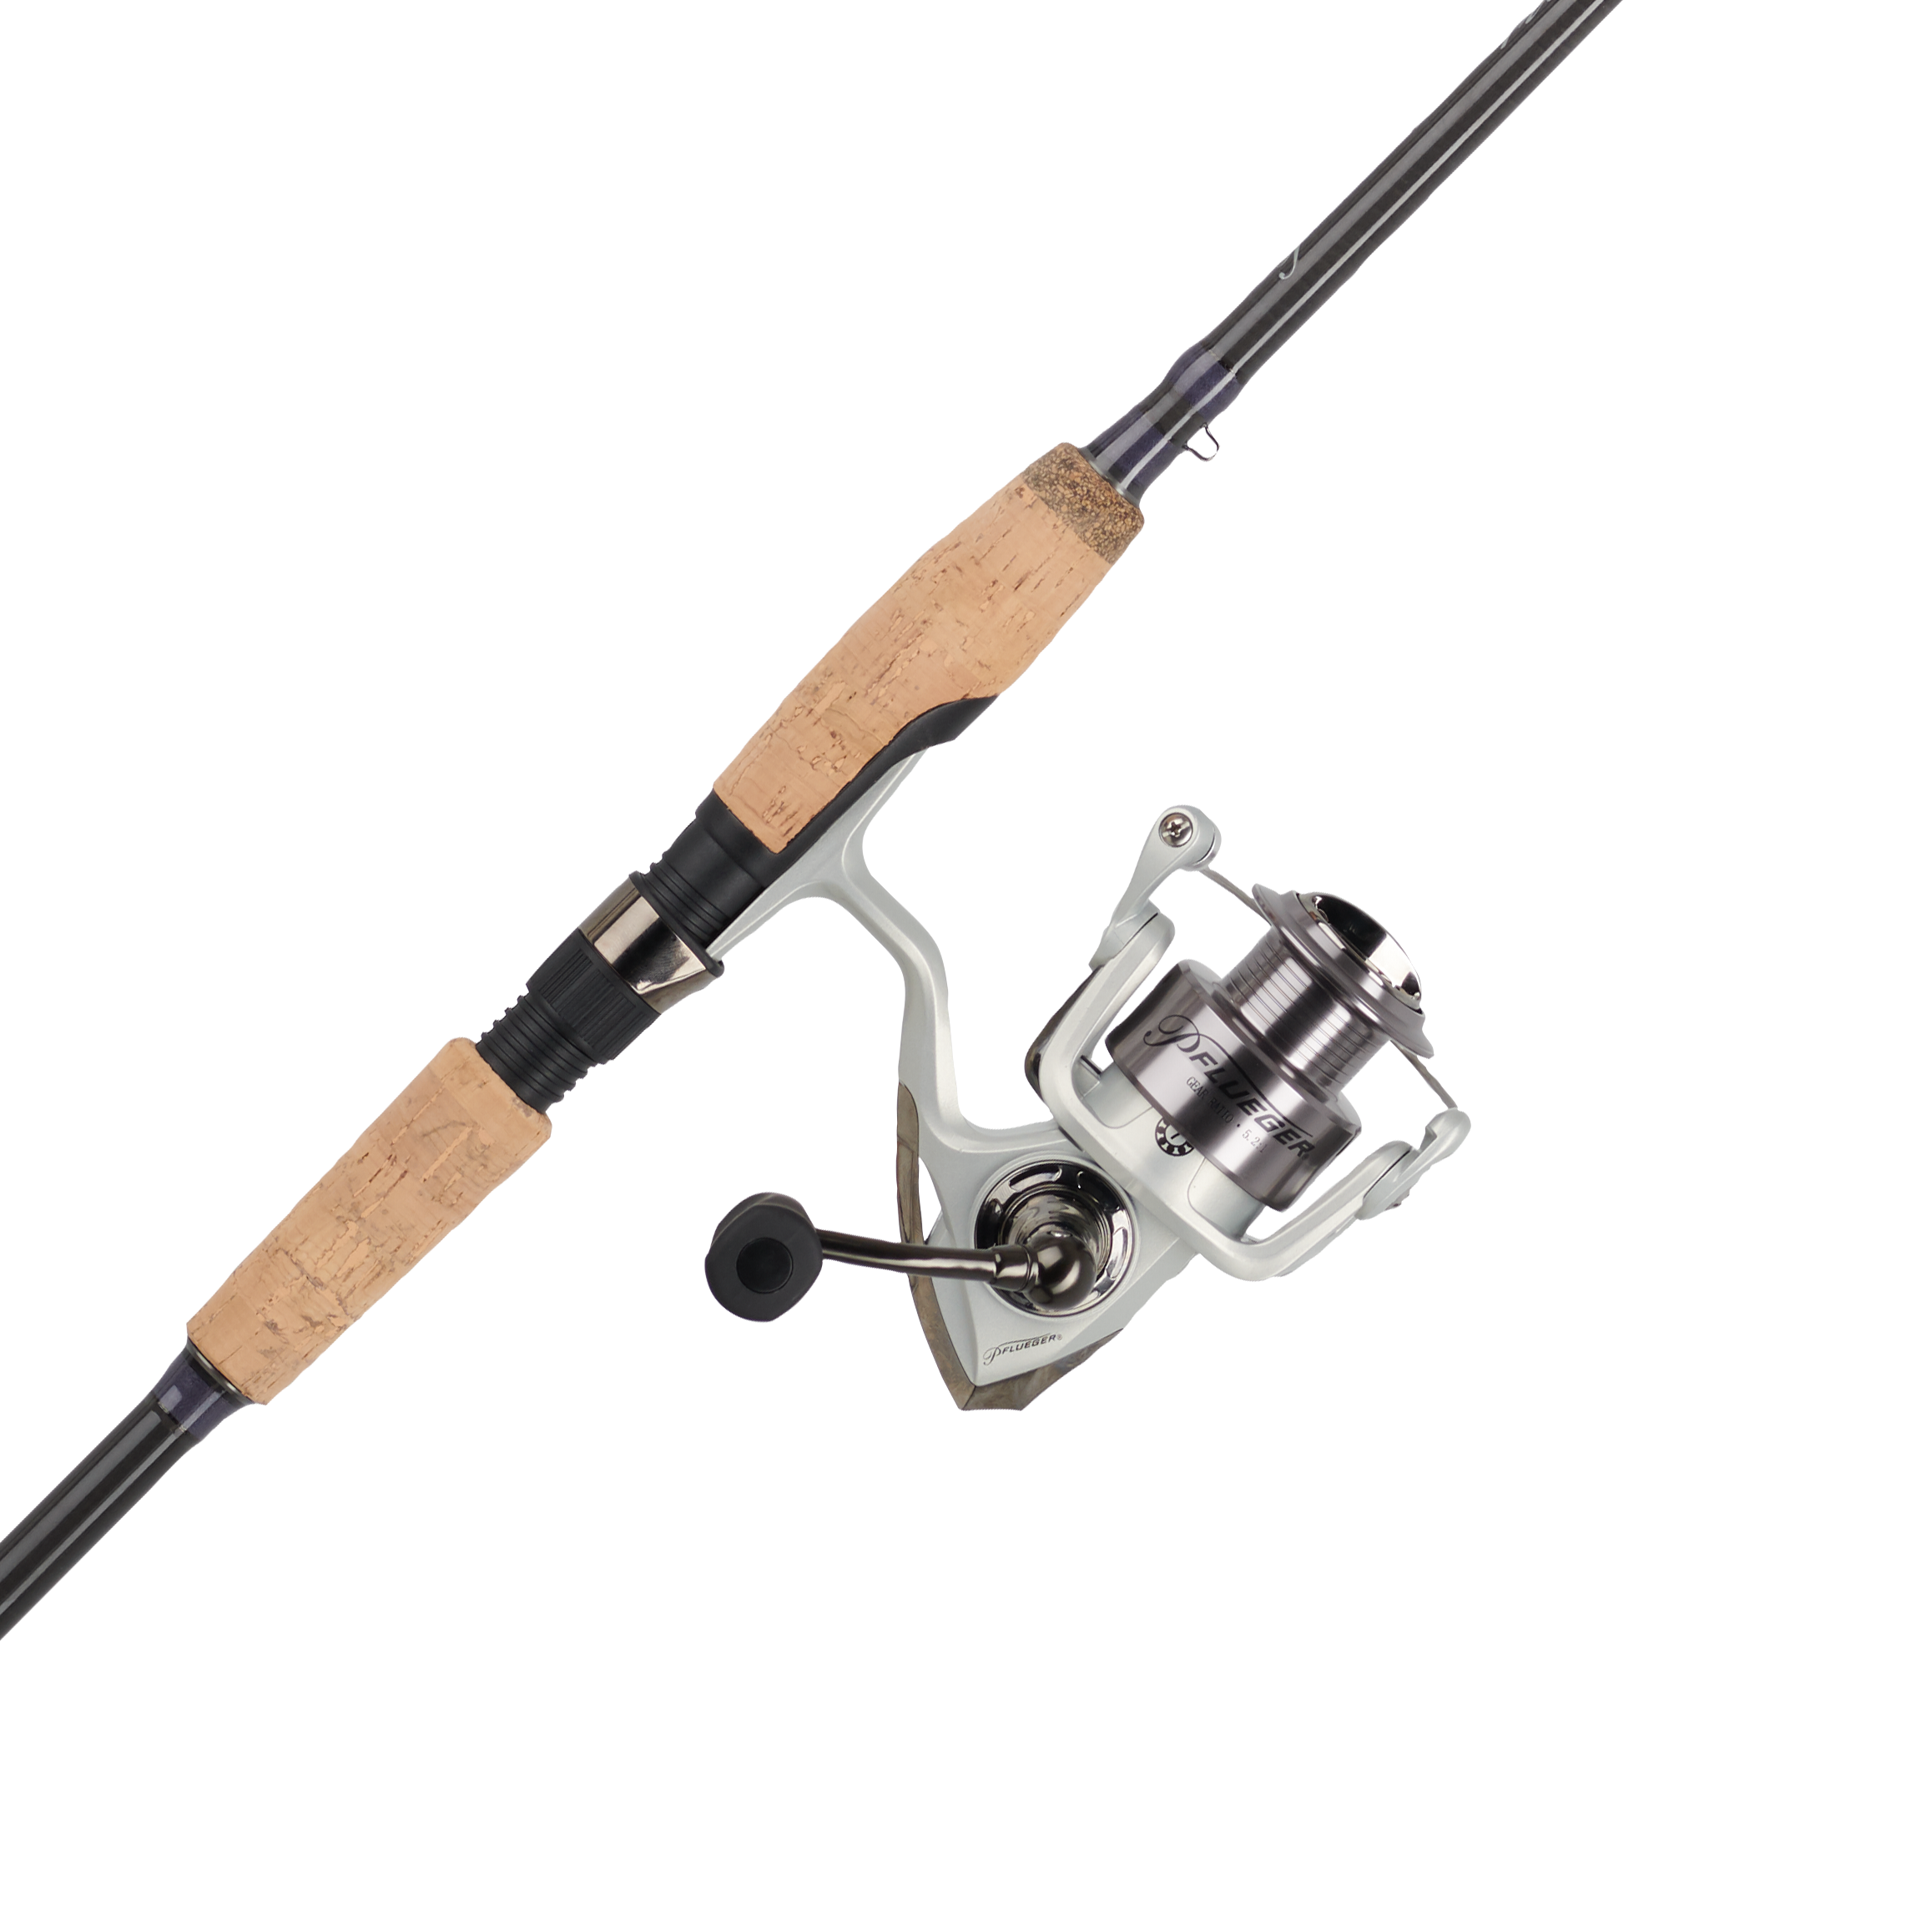 https://op2.0ps.us/original/opplanet-pflueger-trion-spinning-combo-5-2-1-right-left-30-6ft-6in-rod-length-medium-power-2-pieces-rod-trionsp6630m2cbo-main